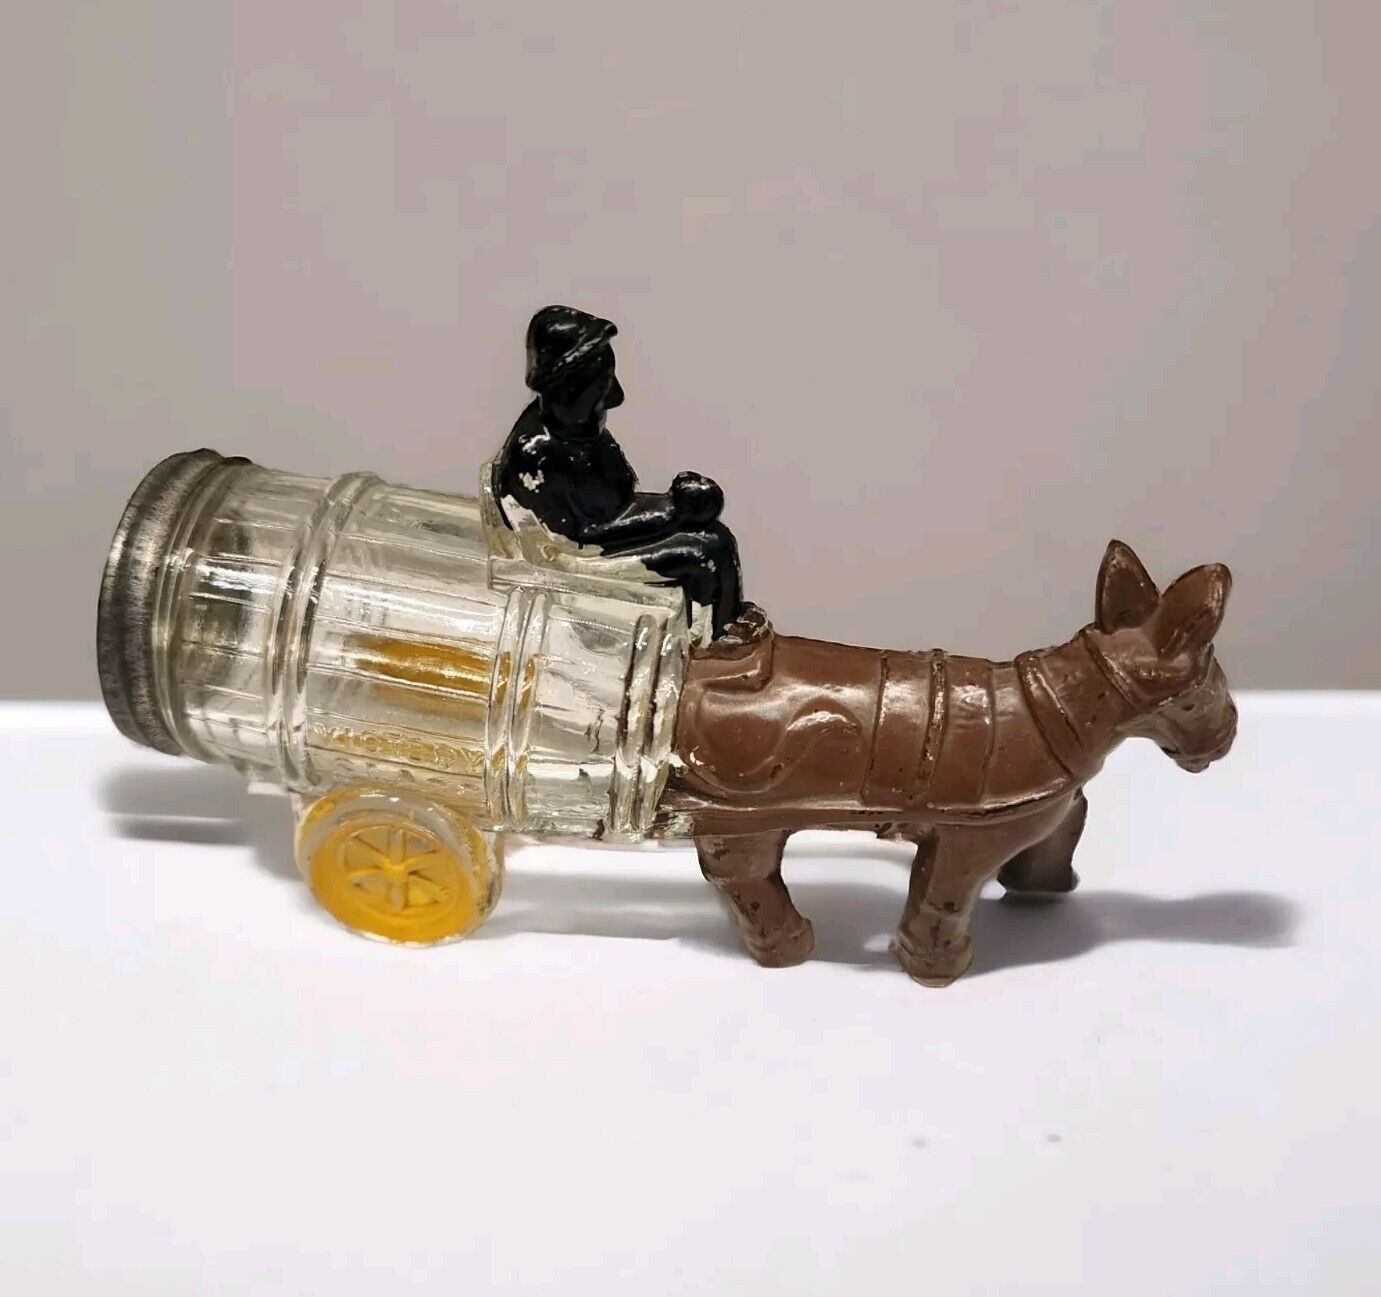 VTG 1930s Avar Glass Candy Container/toy. Man on Wagon Pulled By Donkey/Mule